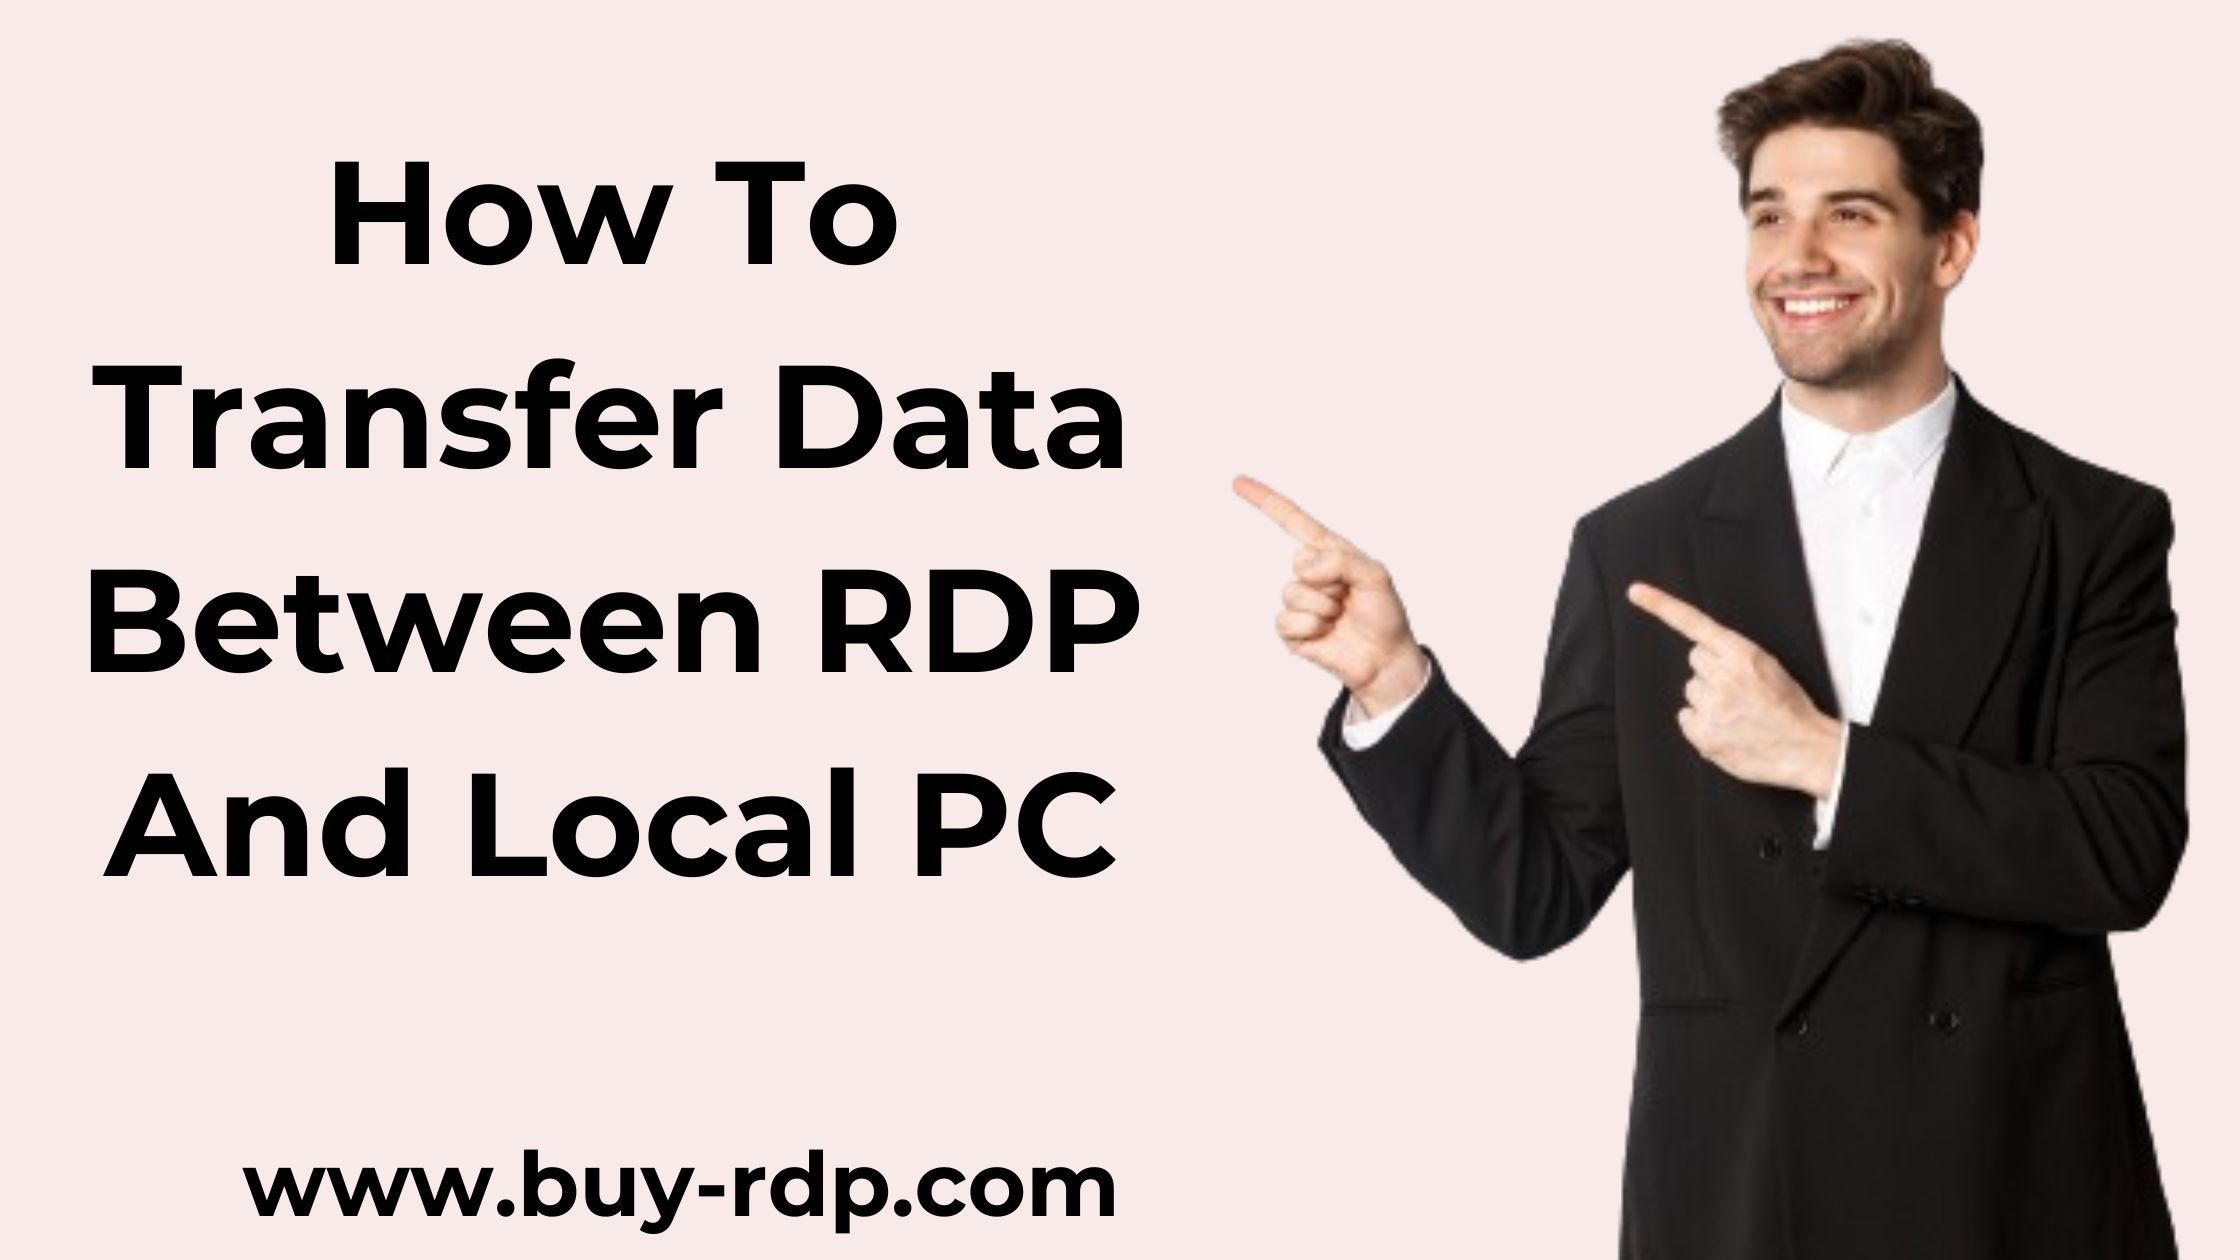 How To Transfer Data Between RDP and Local PC 